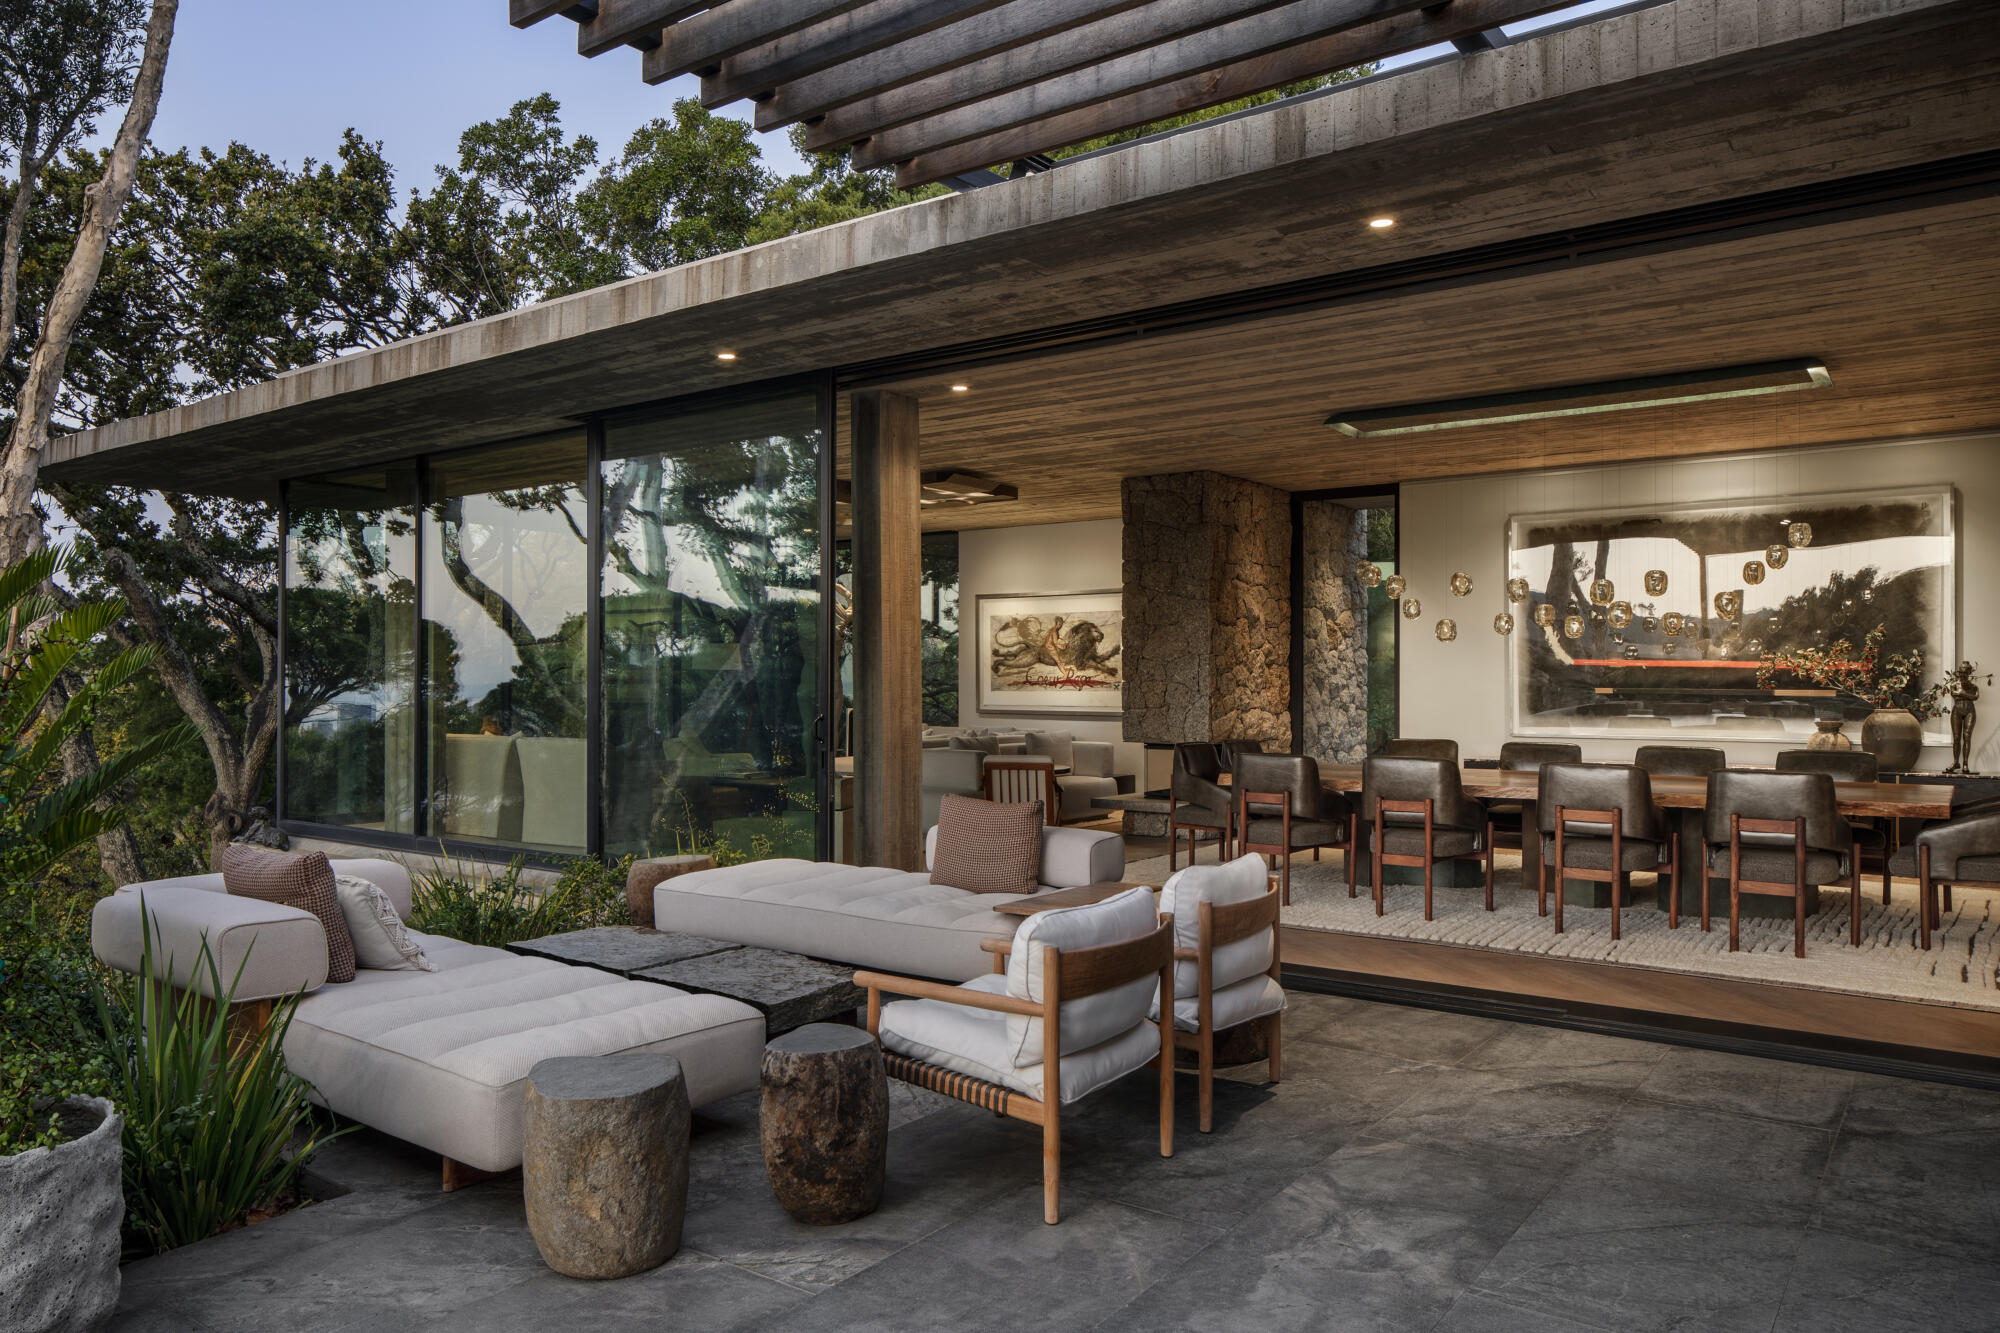 Glen Villa, a contemporary design outdoor living area with a large table and chairs, surrounded by nature's splendor.